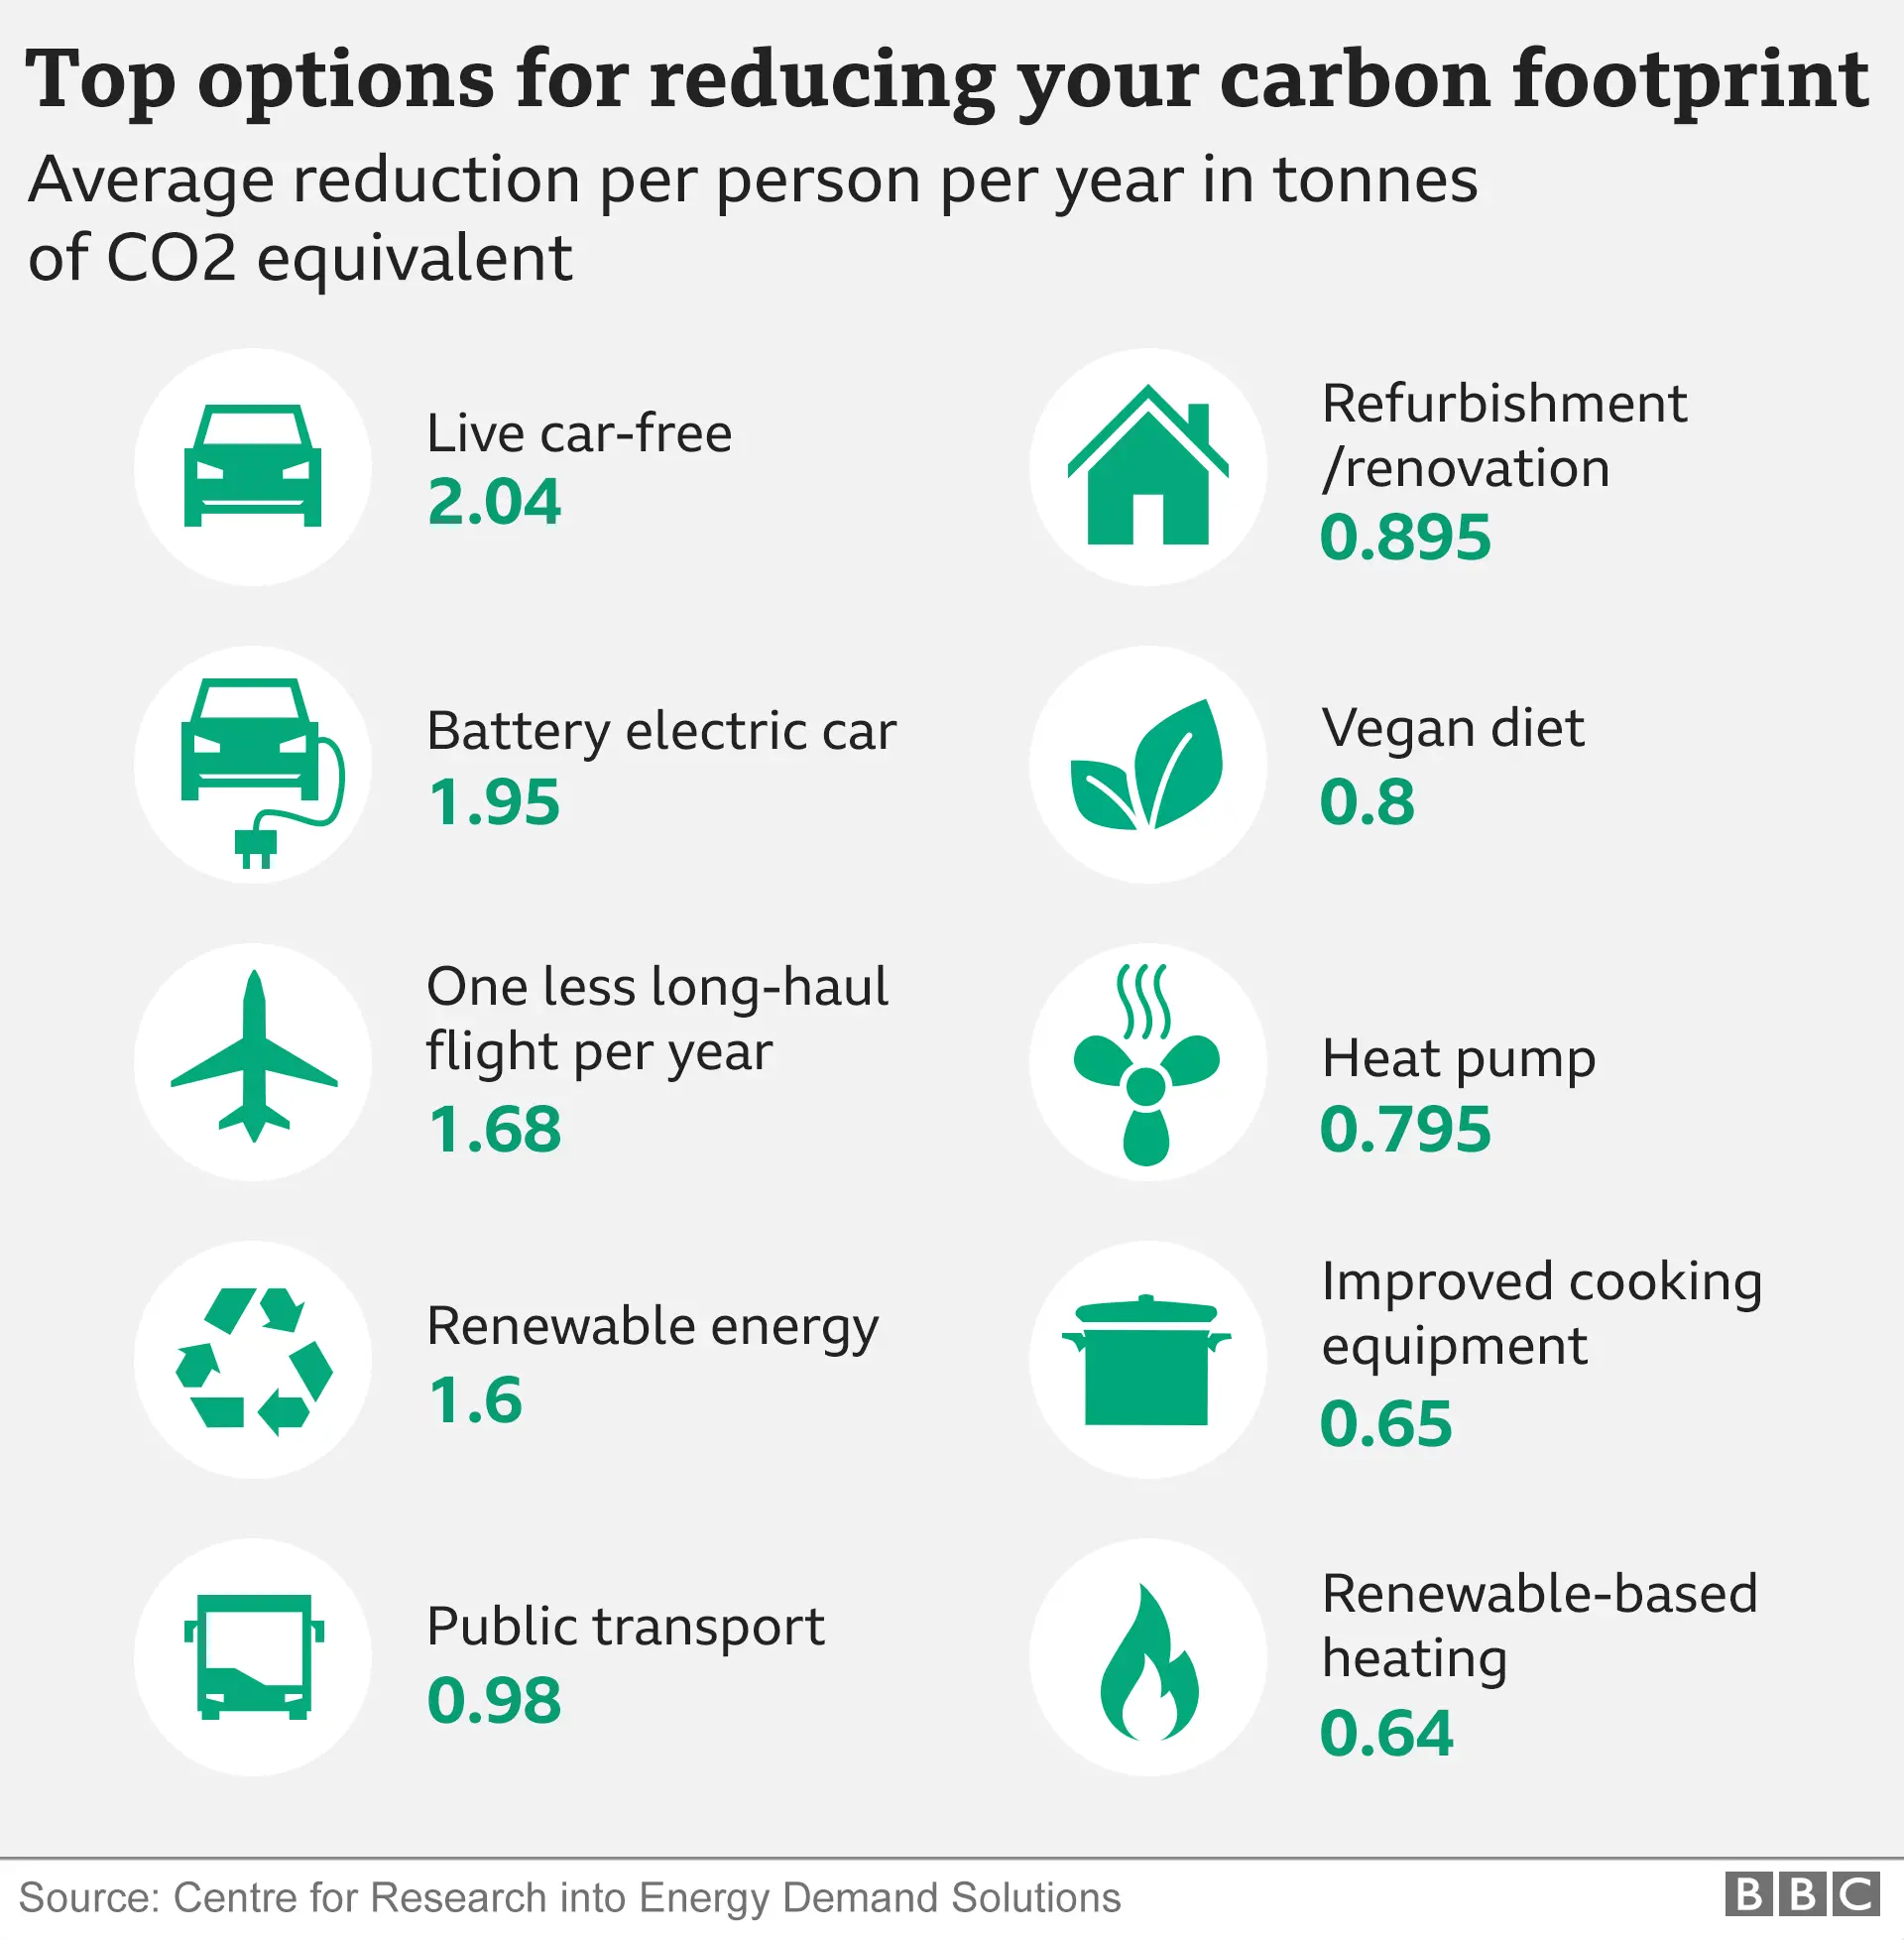 How to measure your carbon footprint